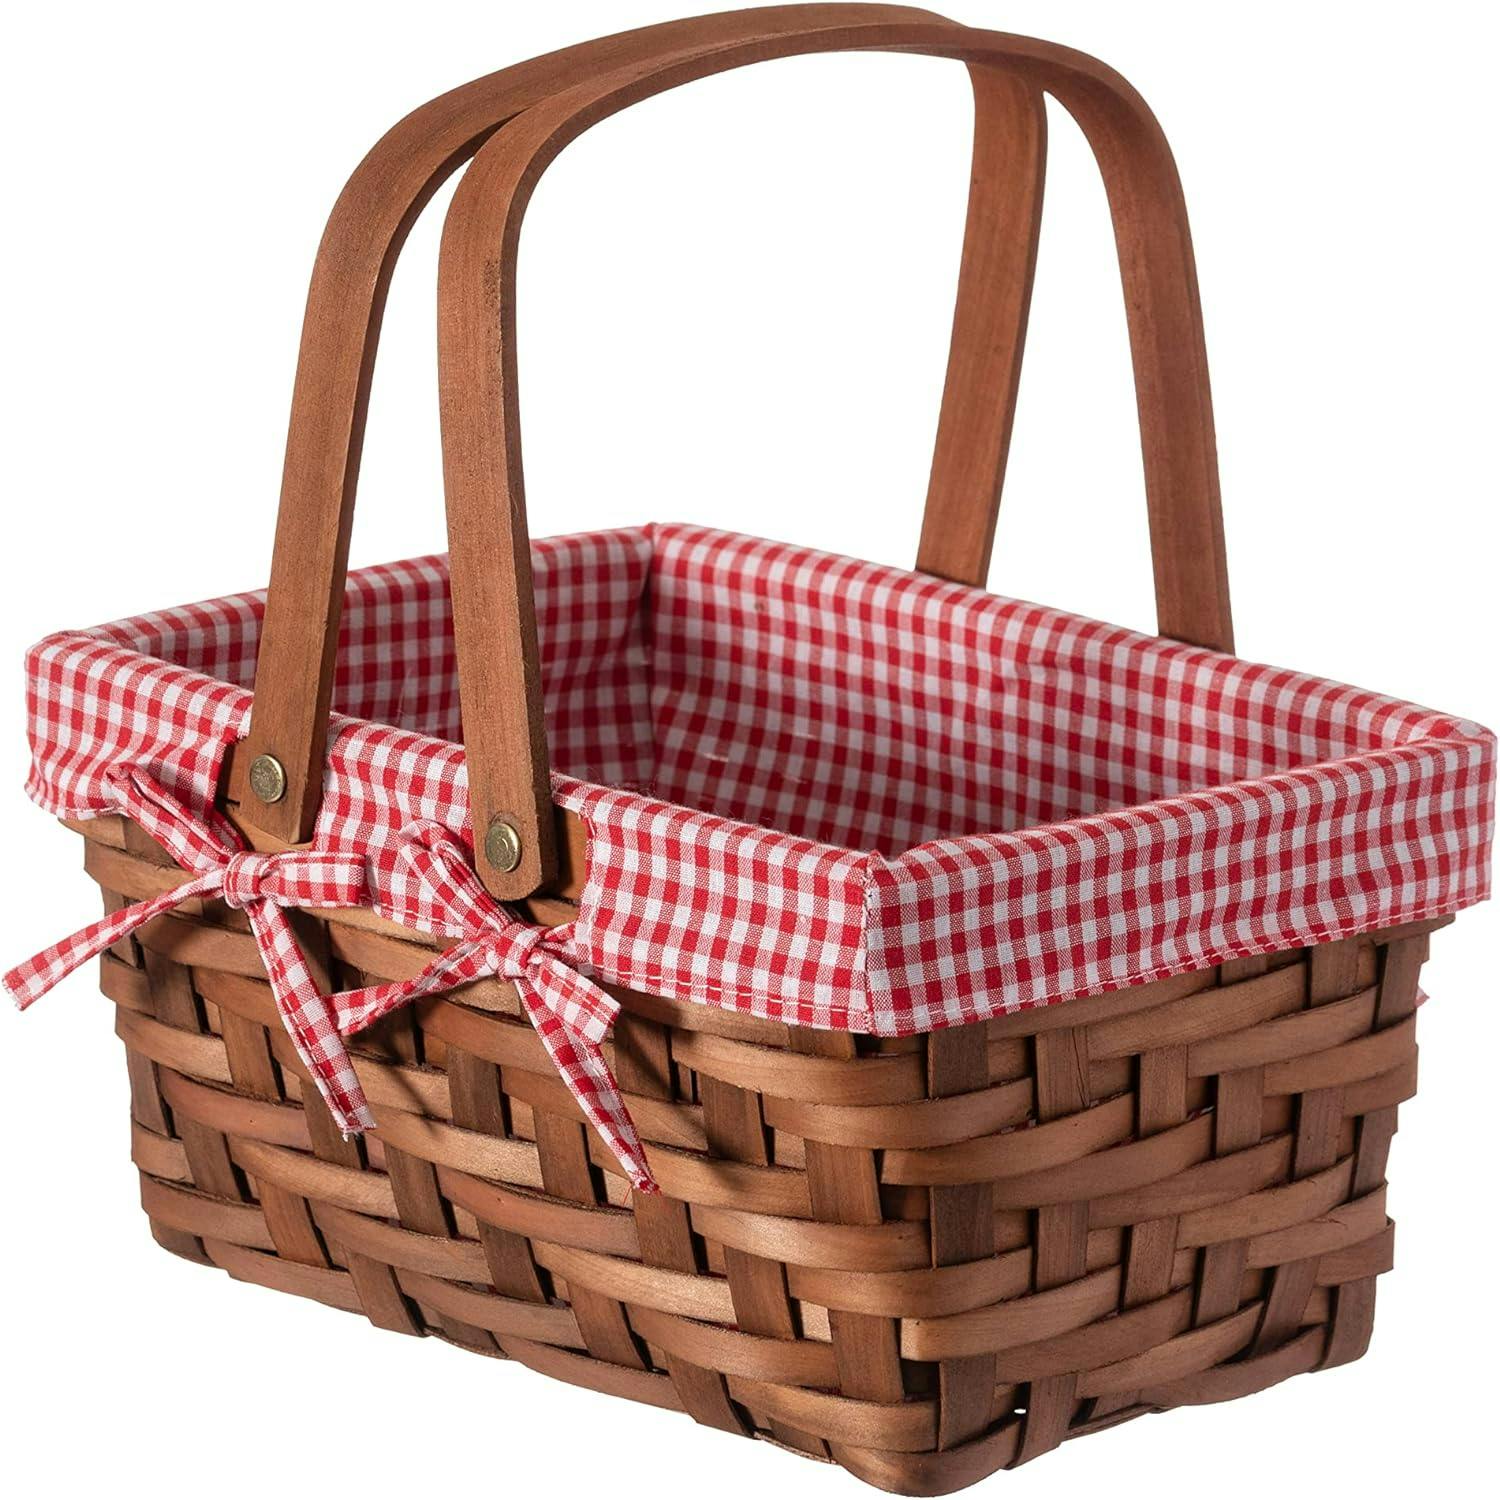 Classic Rectangular Wooden Storage Basket with Red Gingham Lining